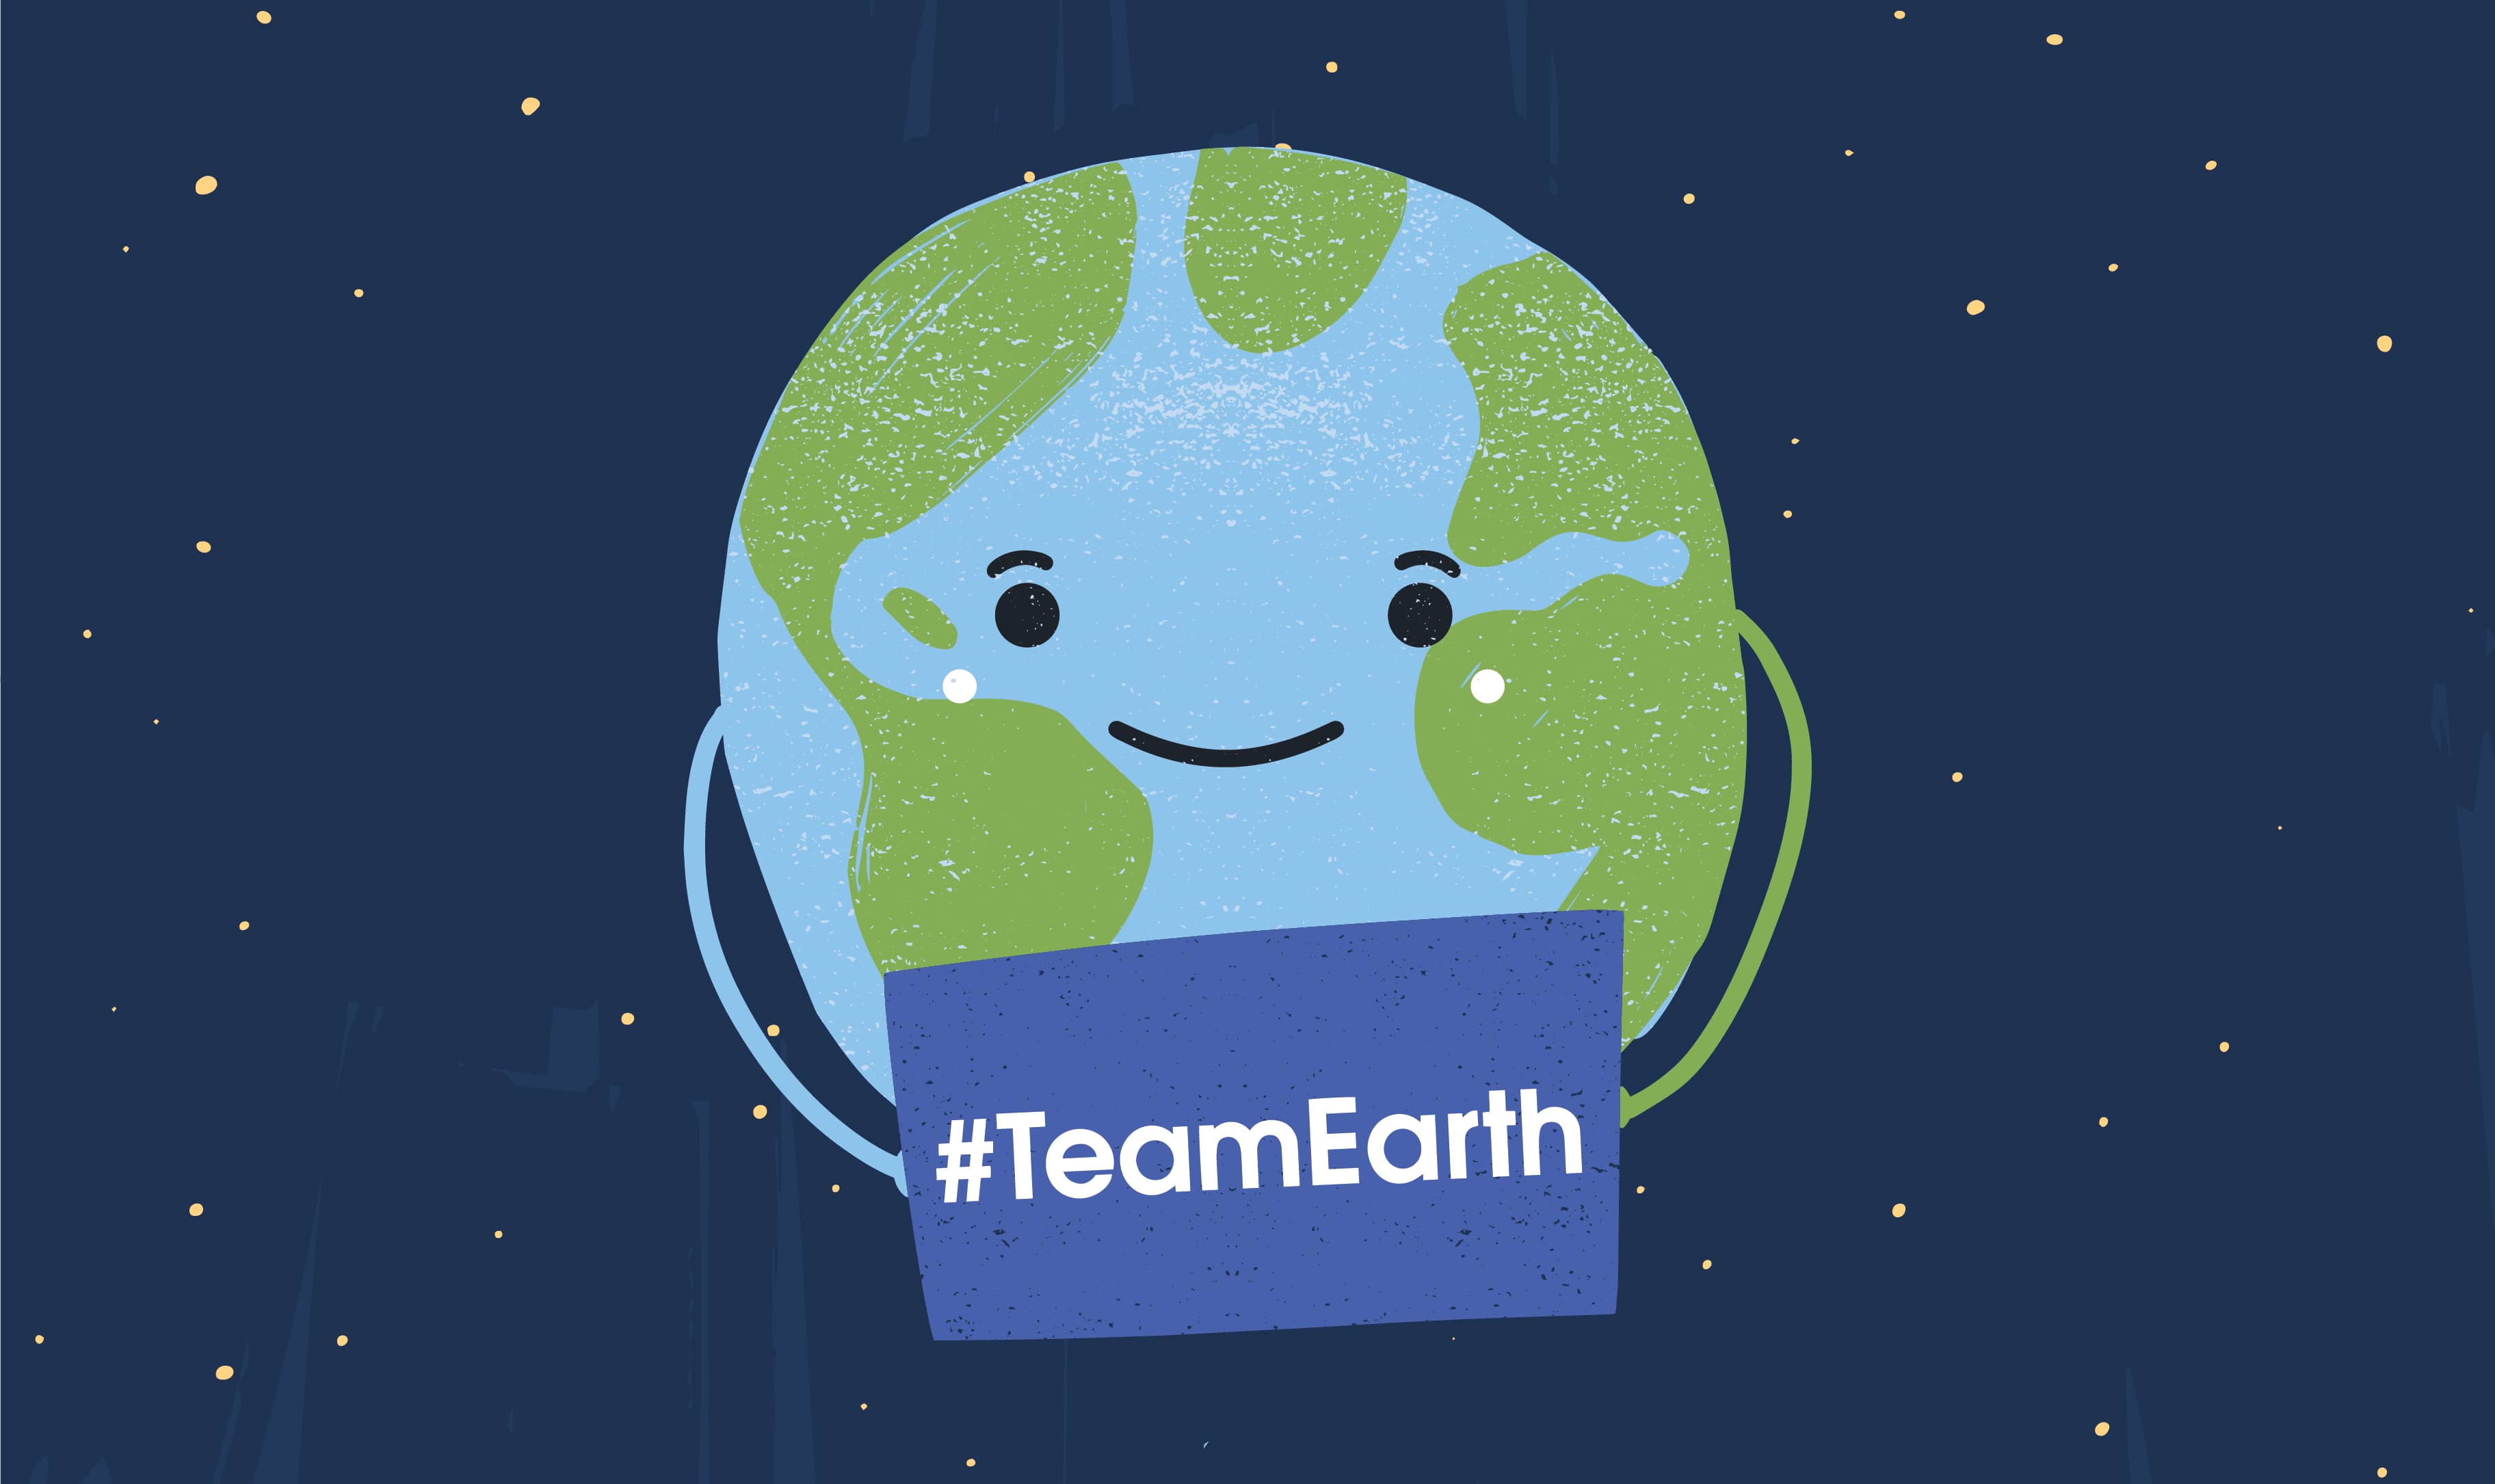 Illustration of the Earth, smiling, holding a sign that says #TeamEarth.